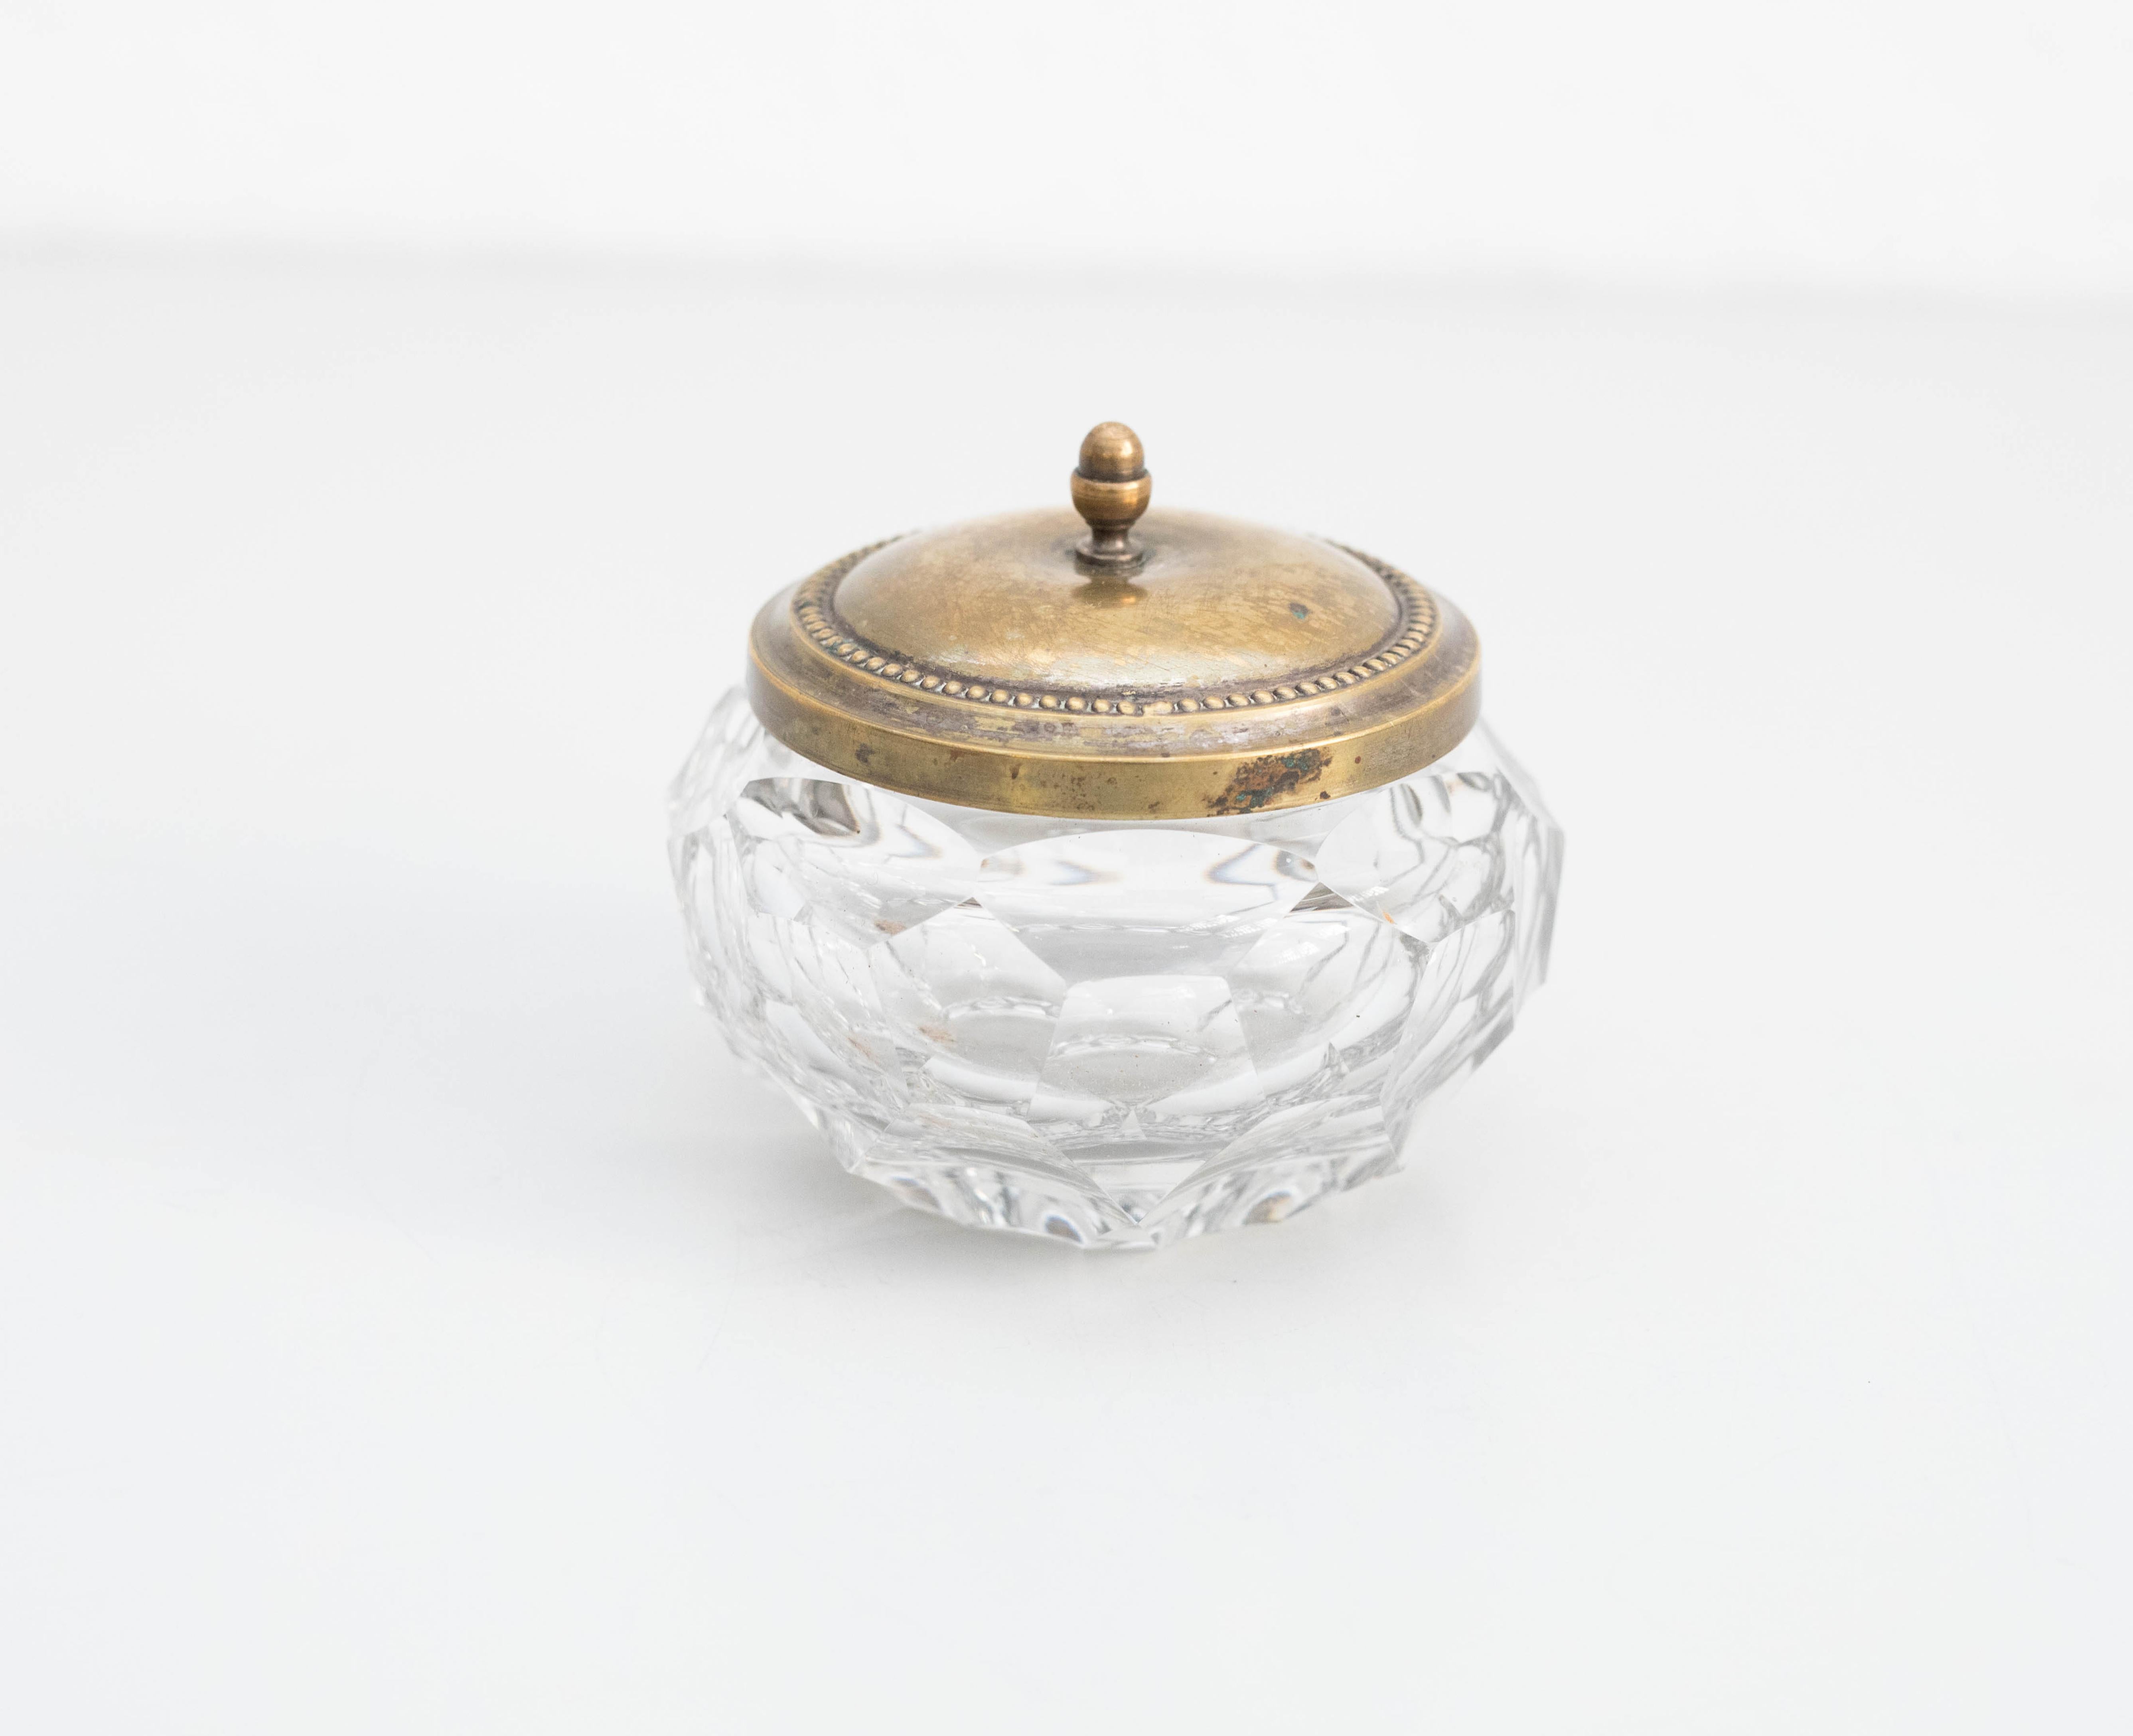 Glass and metal sugar bowl, circa 1930
Manufactured by Unknown, Spain.

In original condition with wear consistent of age and use, preserving a beautiful patina.

Material:
Glass and metal

Dimensions:
Ø 13.5 cm x H 10 cm.